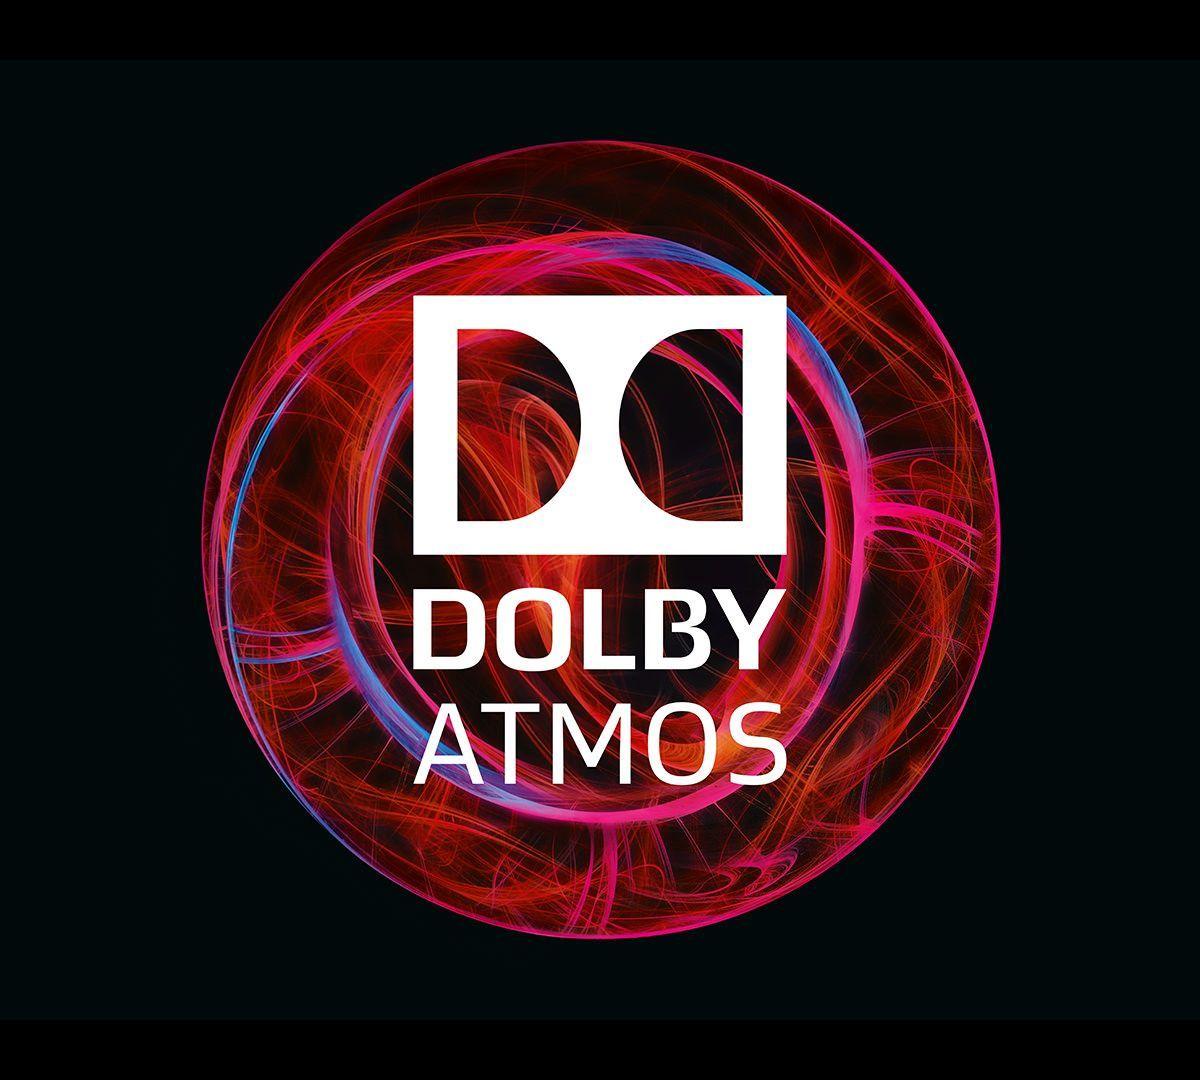 Dolby Atmos Logo - Dolby Atmos - branding illustrations | Dolby in 2019 | Dolby atmos ...